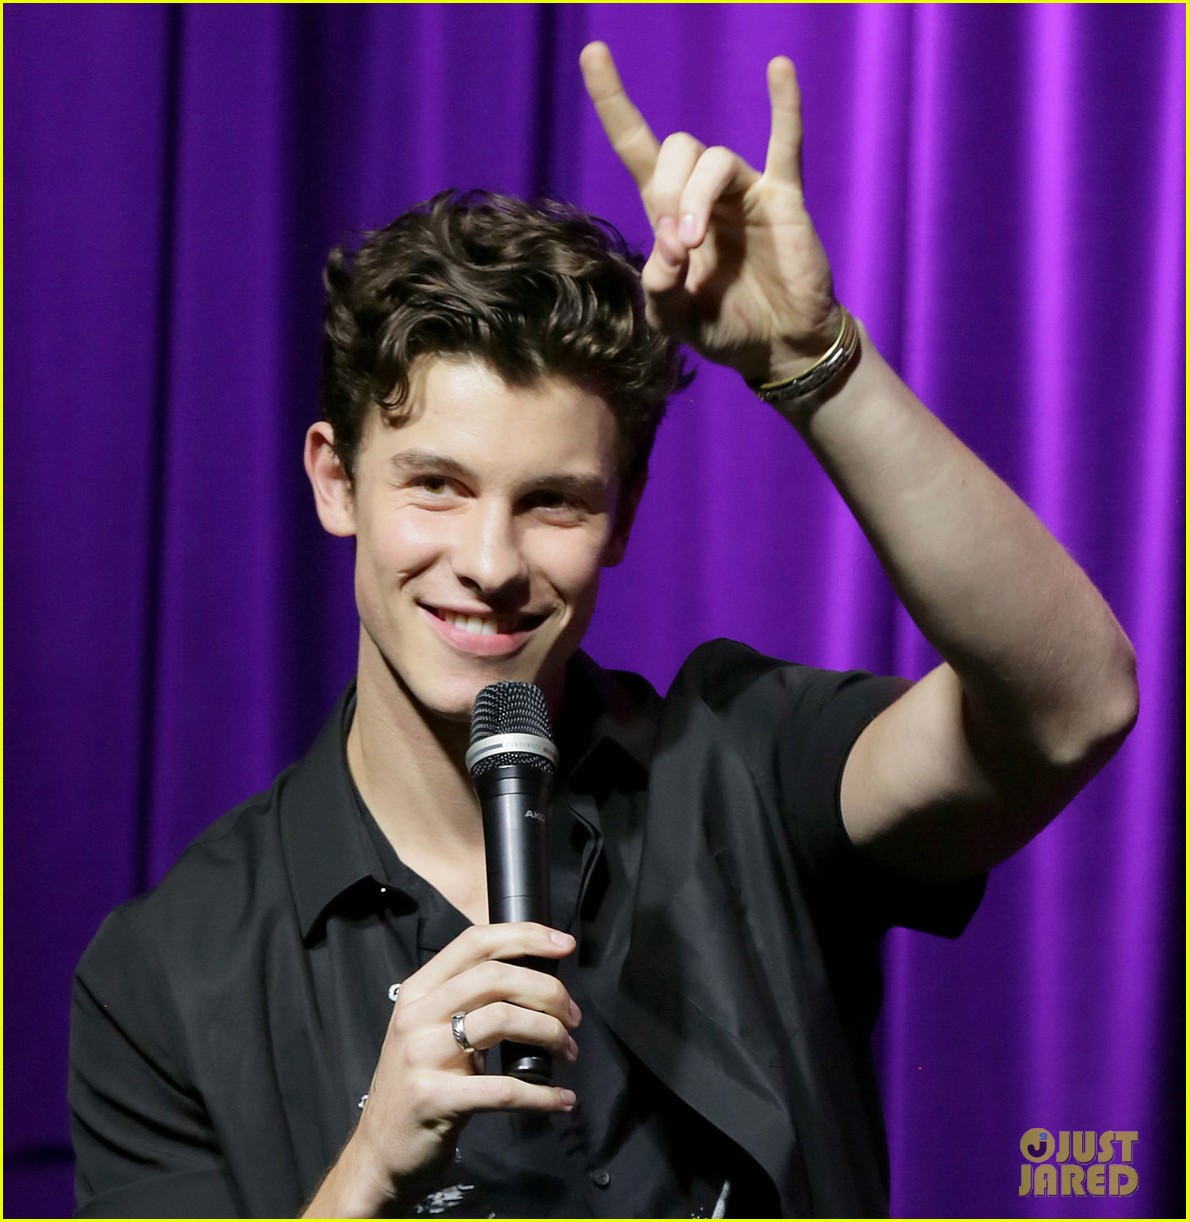 shawn mendes says hes the most nervous guy at grammy museum performance08